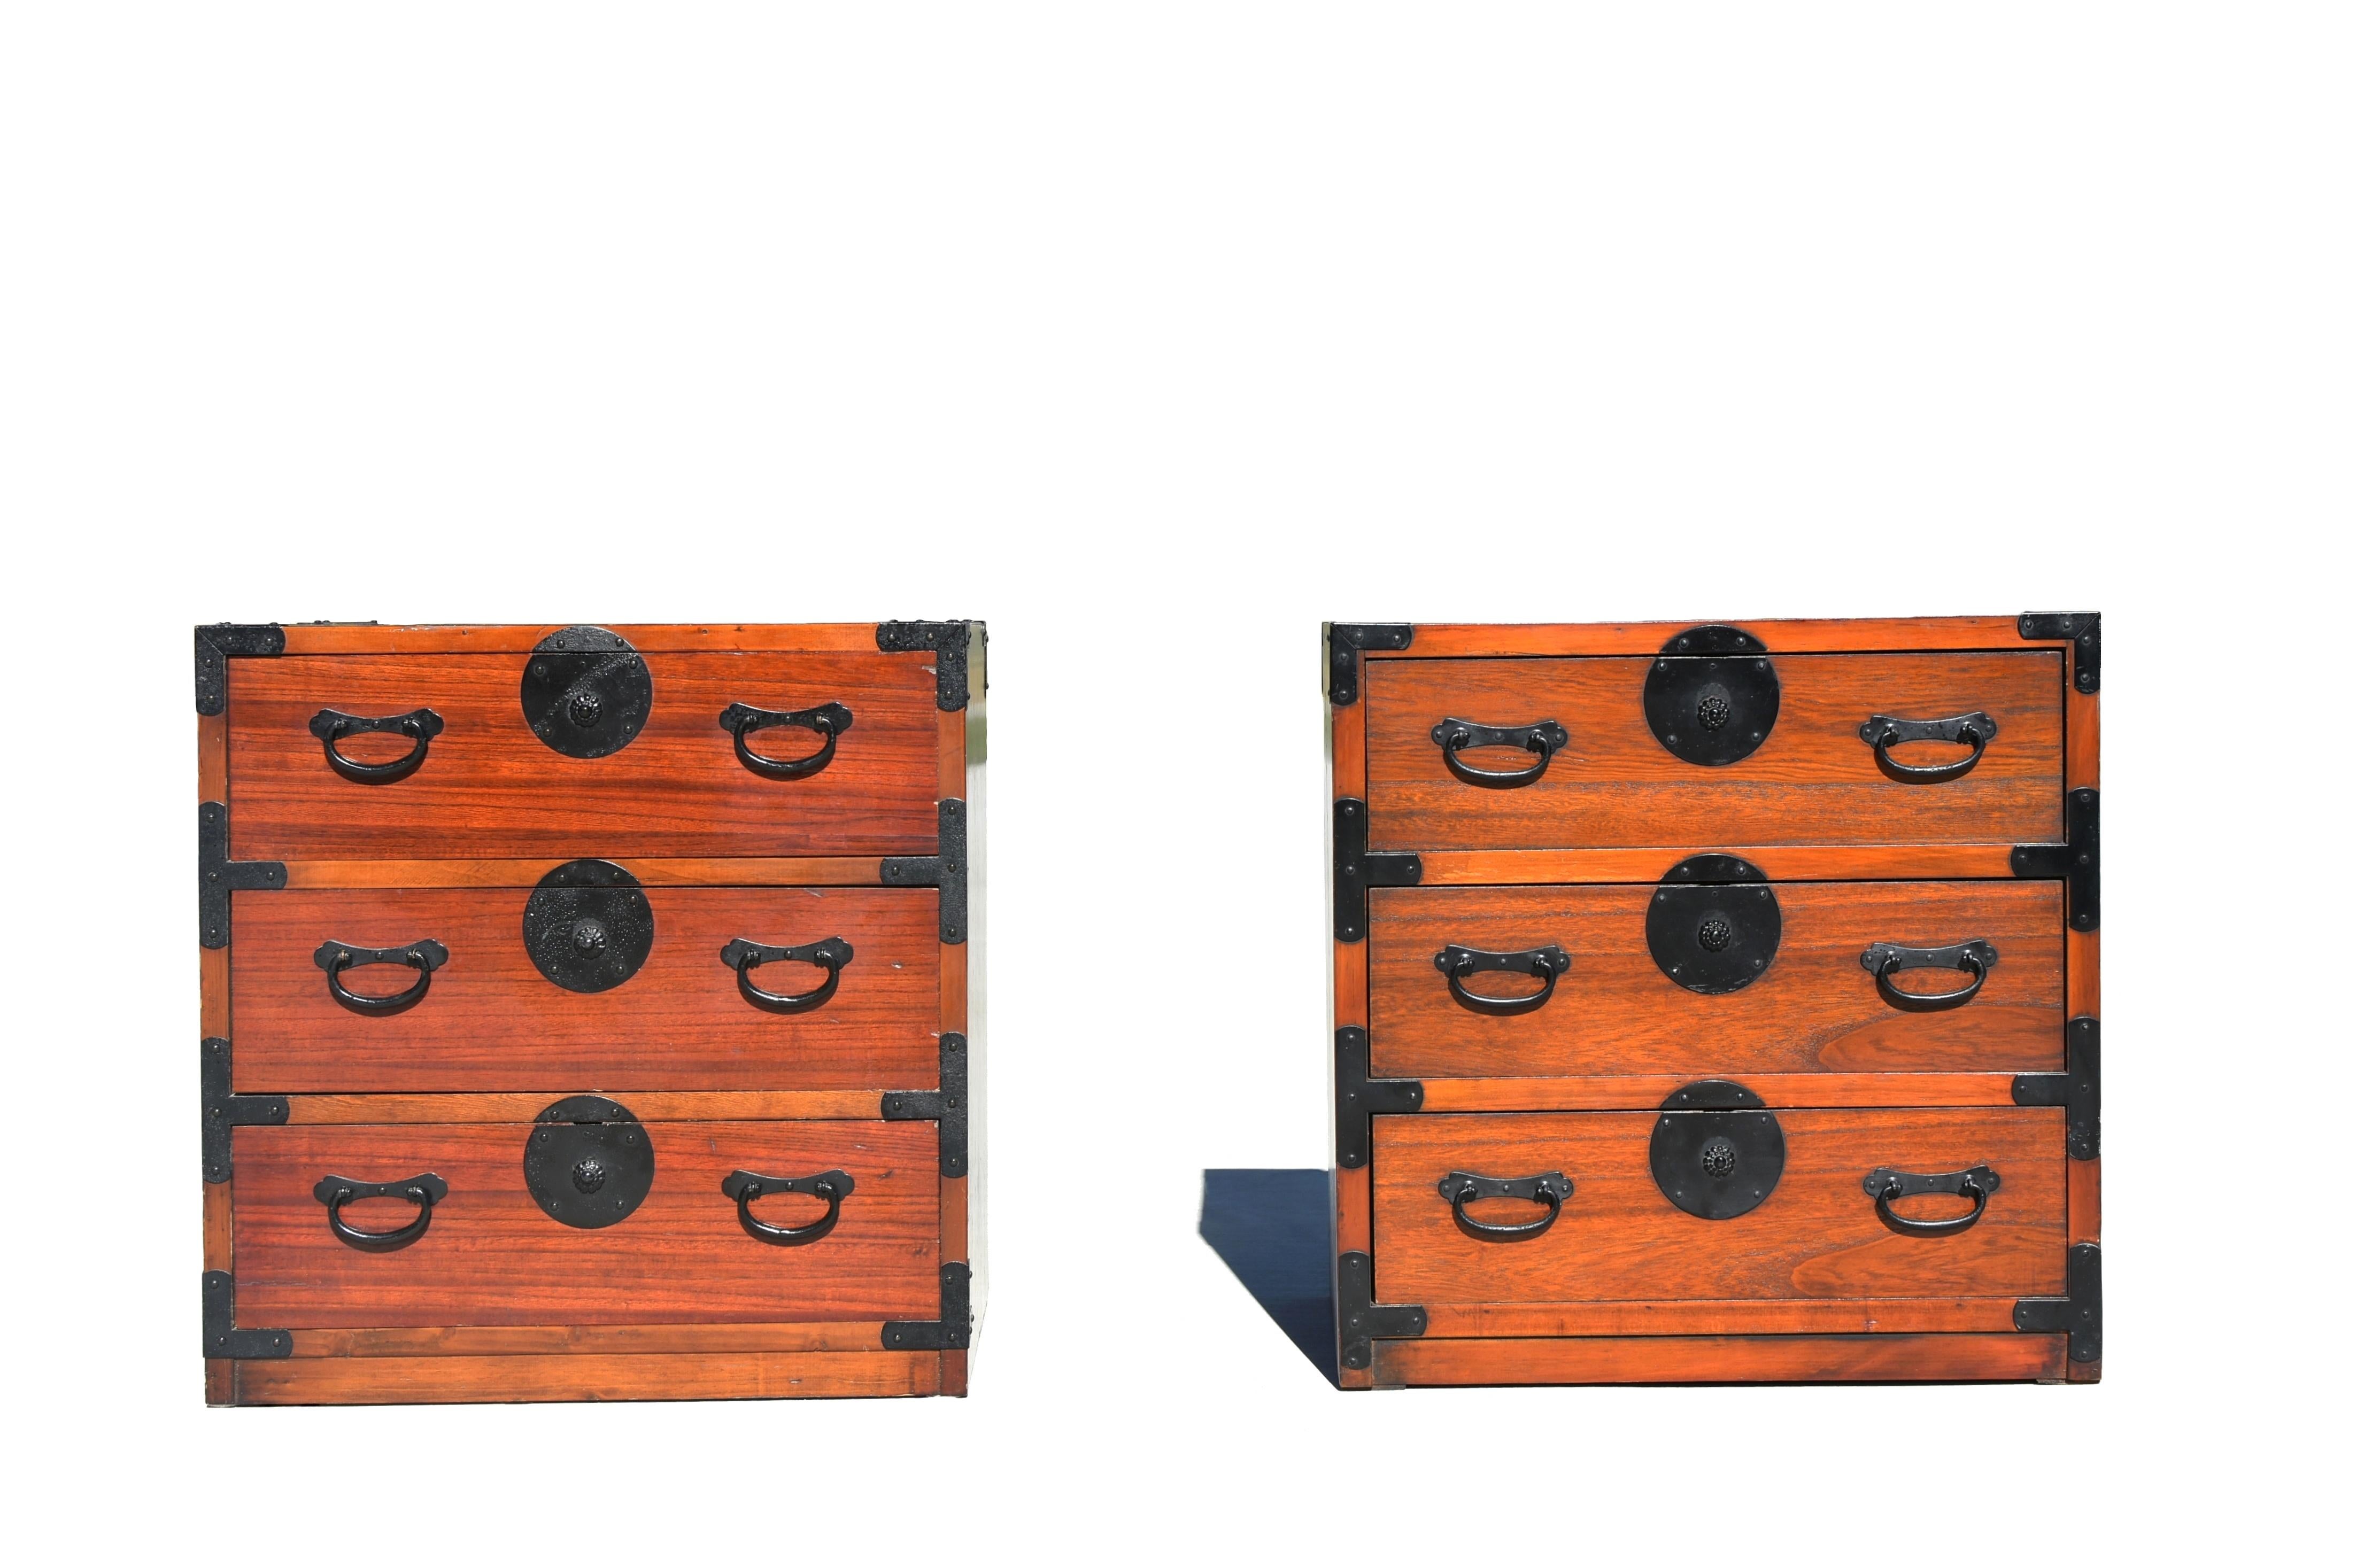 A set of two vintage Japanese tansu chests. The two chests are identical except one has a slightly darker, more reddish finish. This is a way for Japanese craftsmen to demonstrate custom pieces made with choice wood, as clear finish allows the color